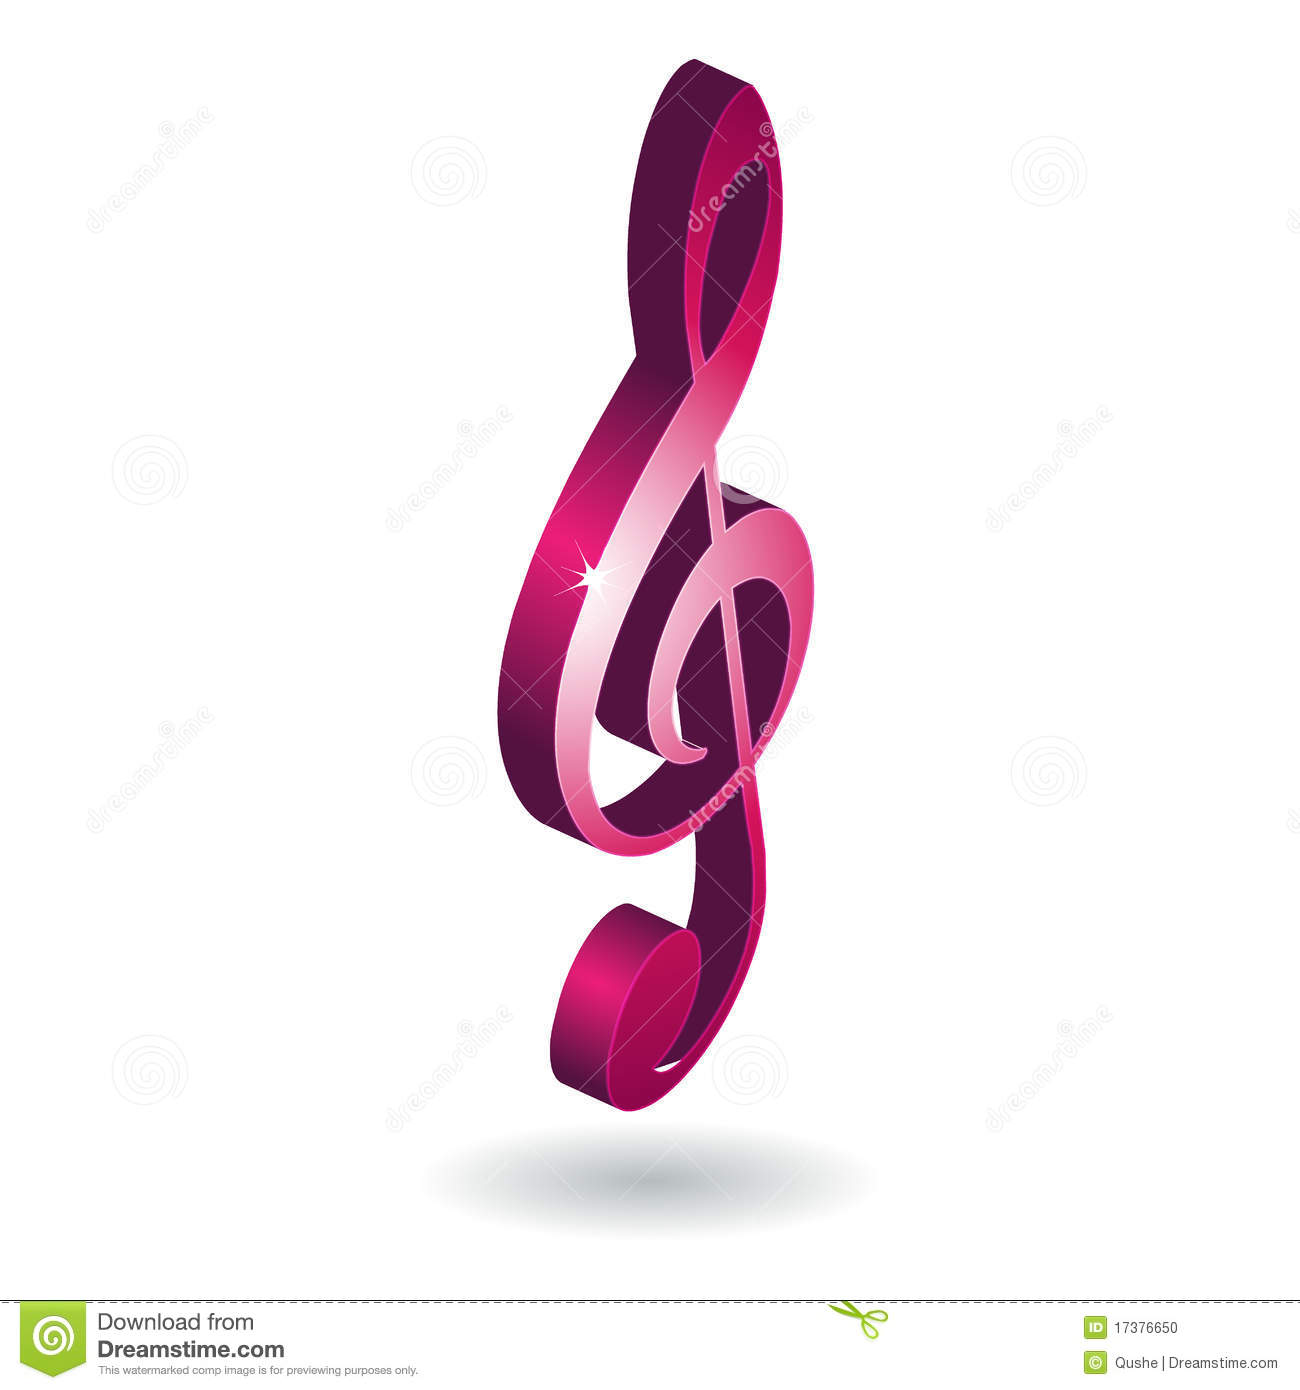  Colorful Music Notes Wallpaper Colorful Music Notes Symbols 3d Music    